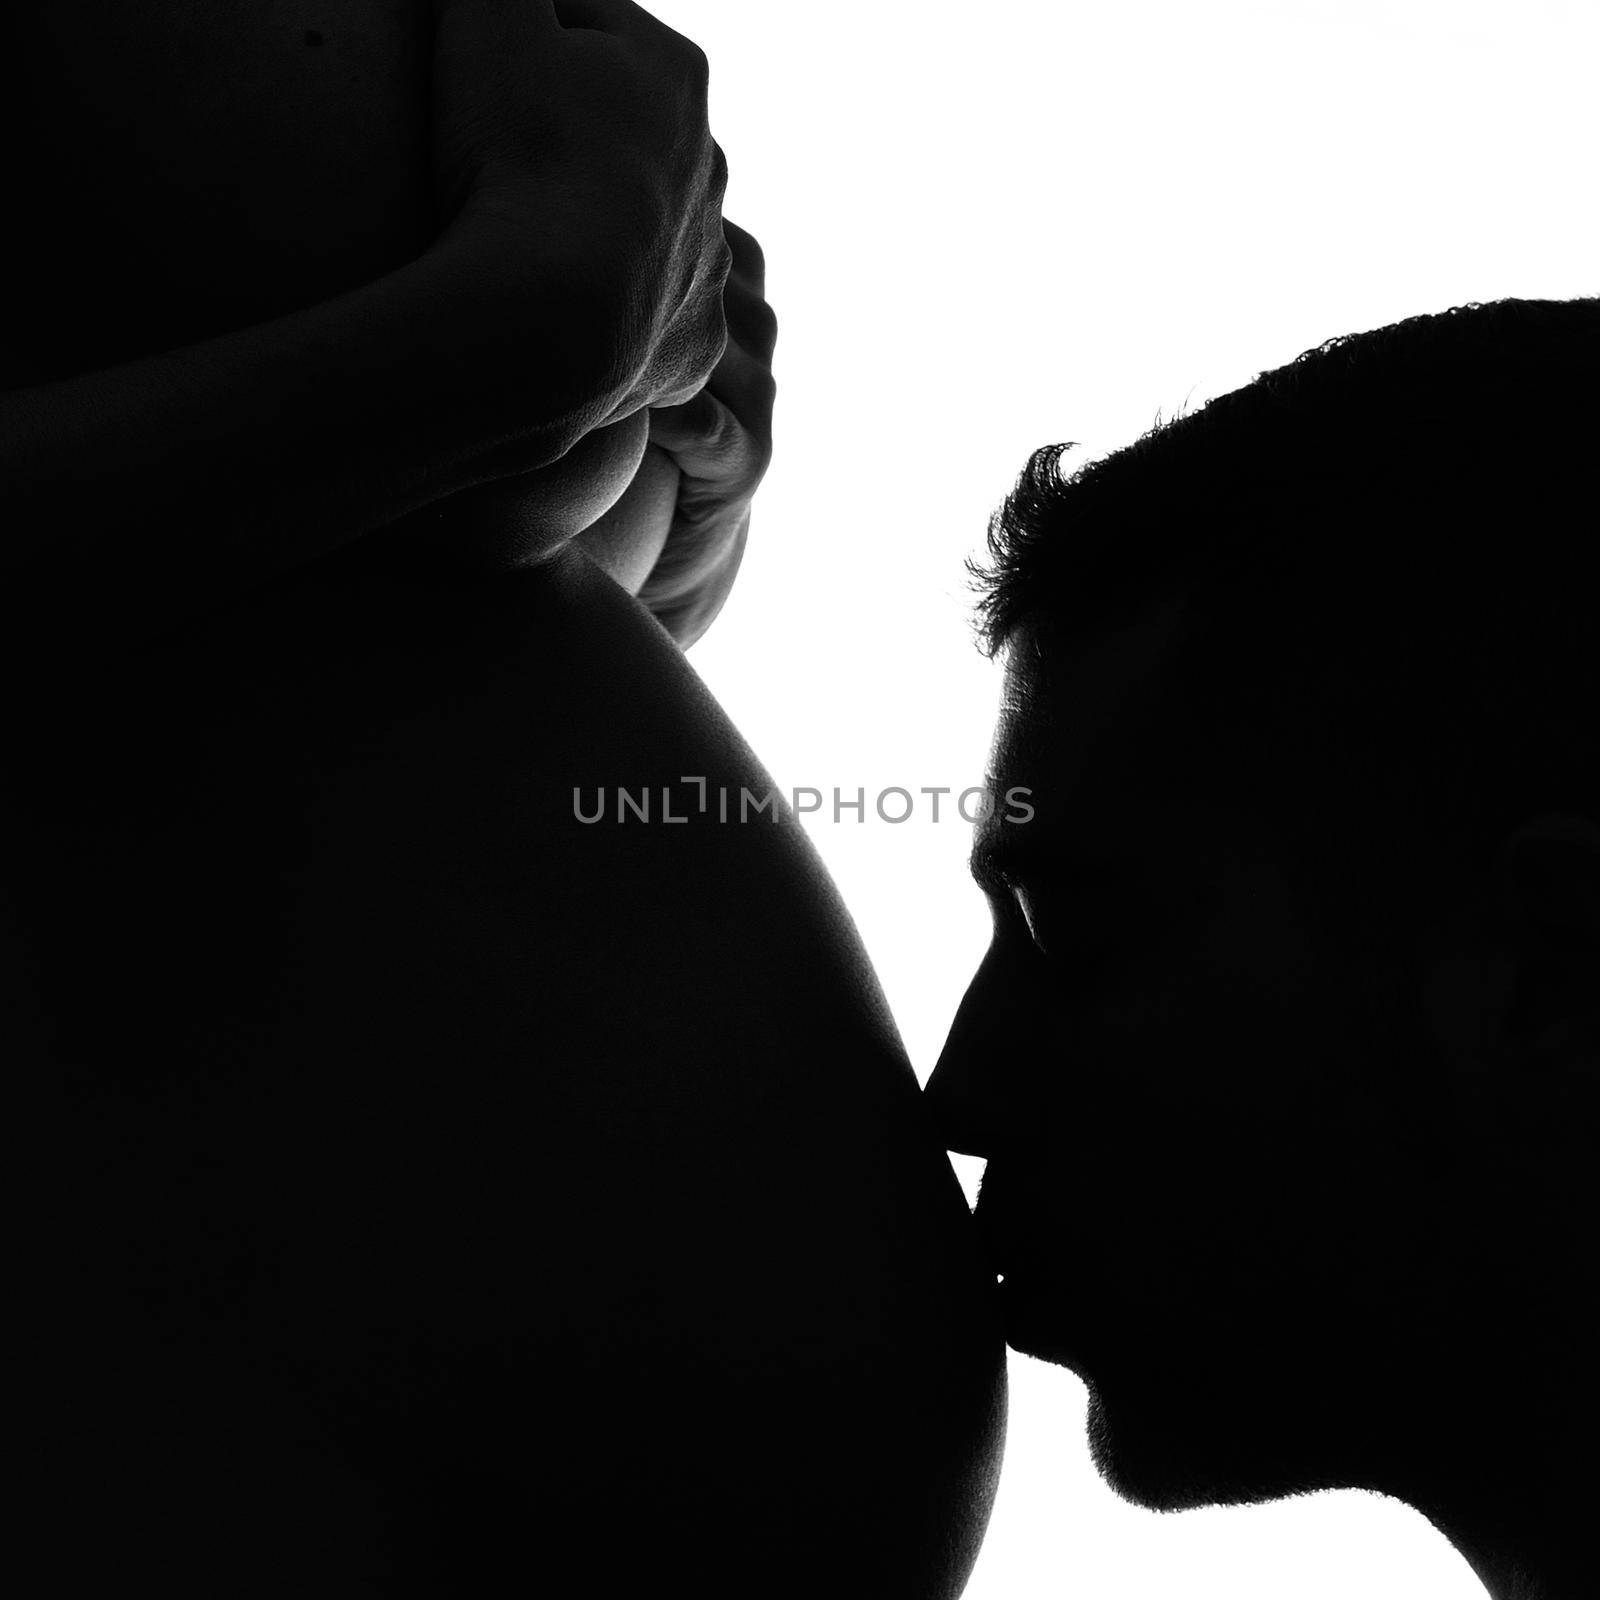 Man kissing his pregnant wife's belly in black and white